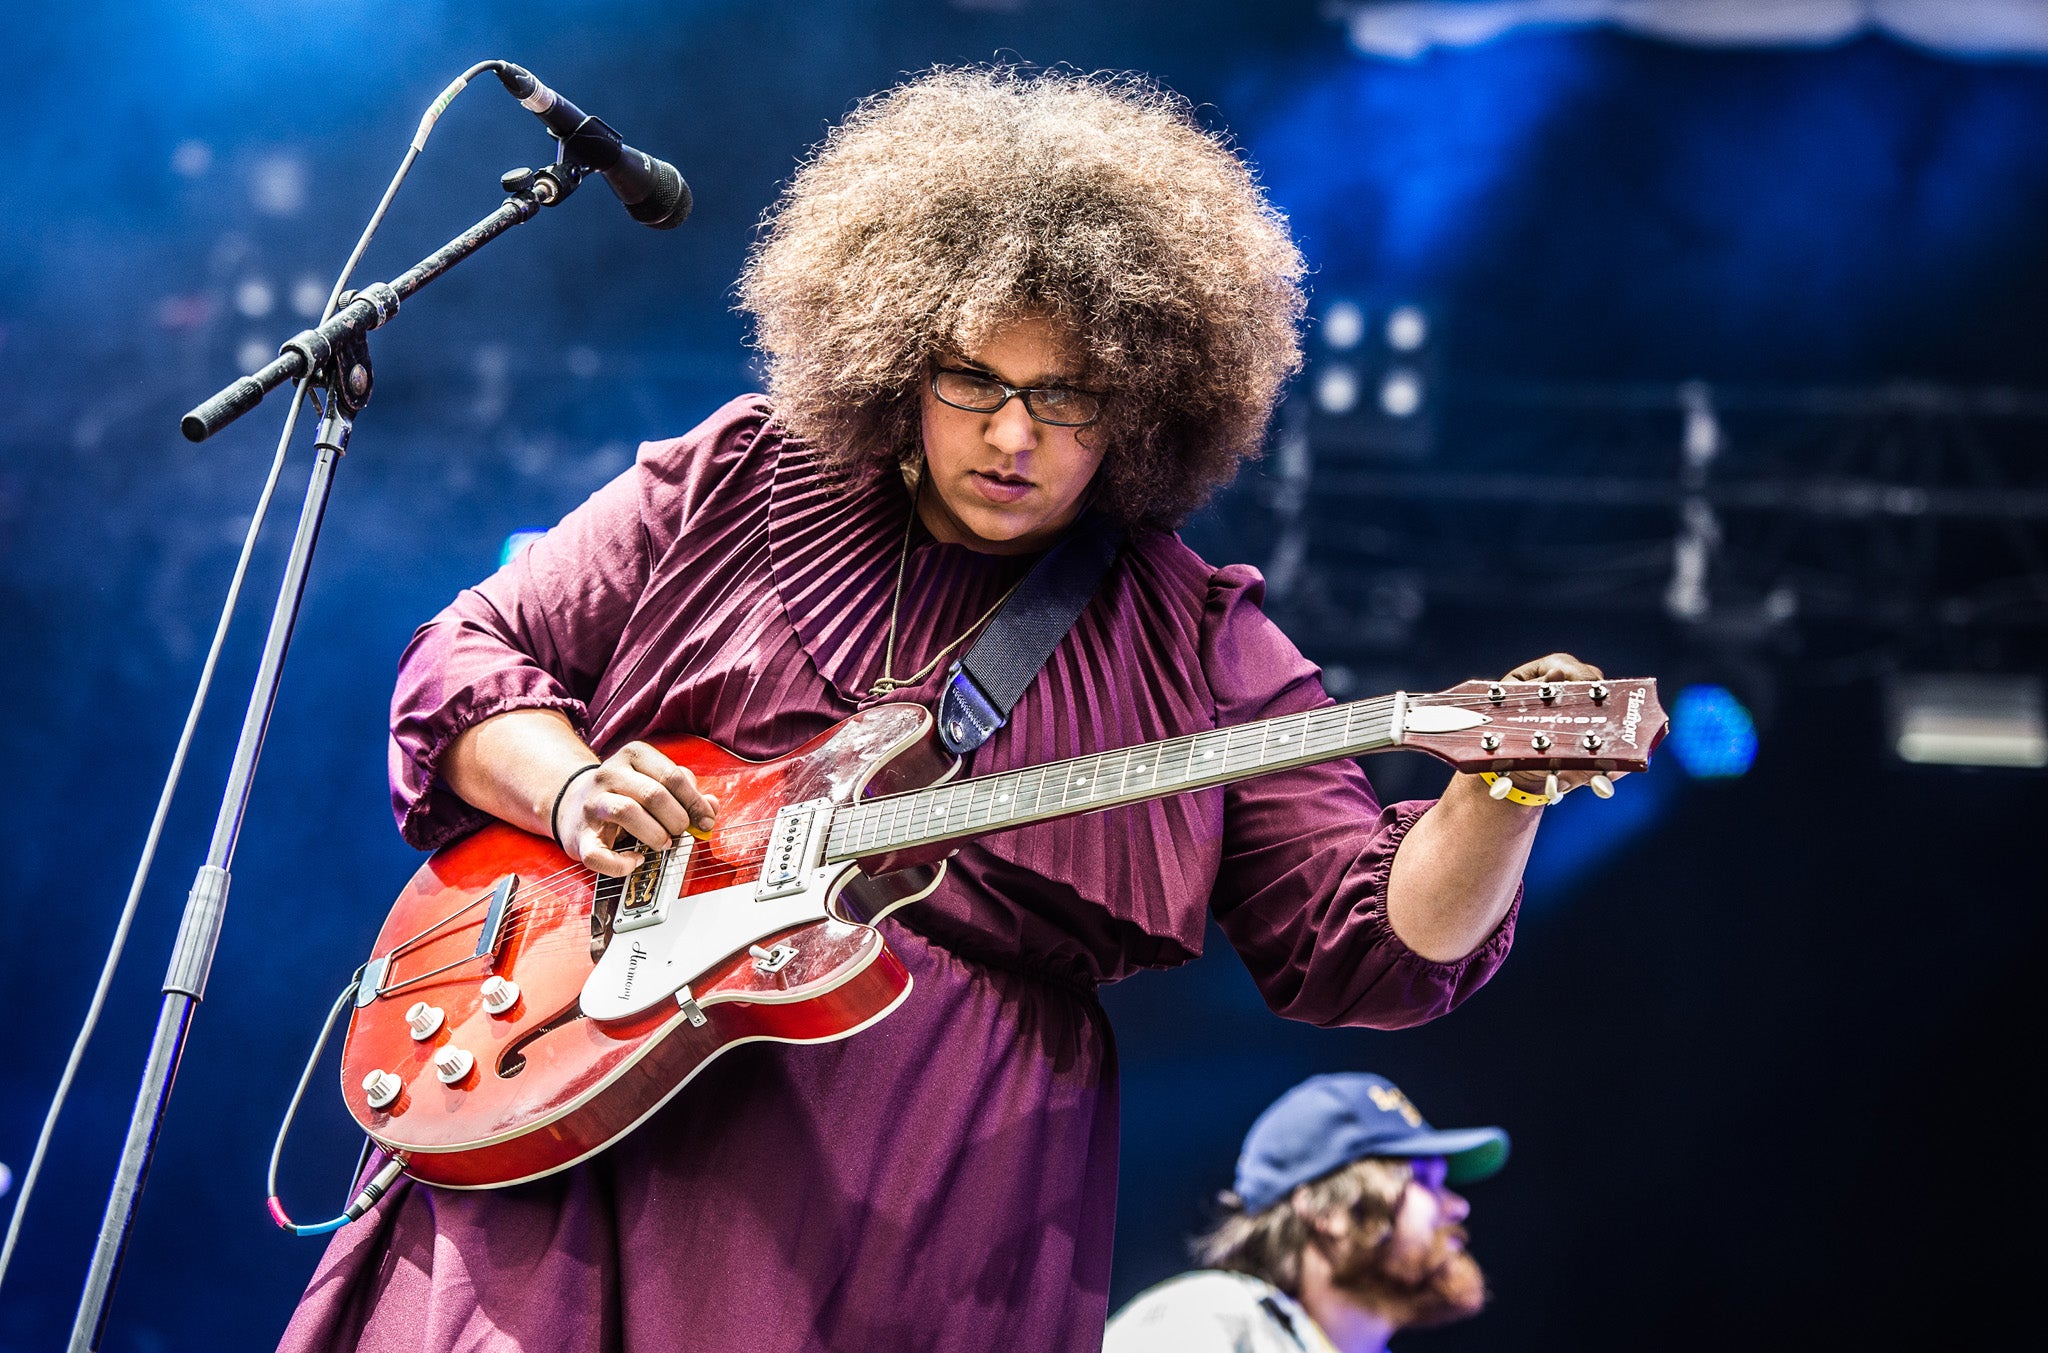 Brittany Howard from Alabama Shakes performs at Eurockeennes Music Festival on July 1, 2012